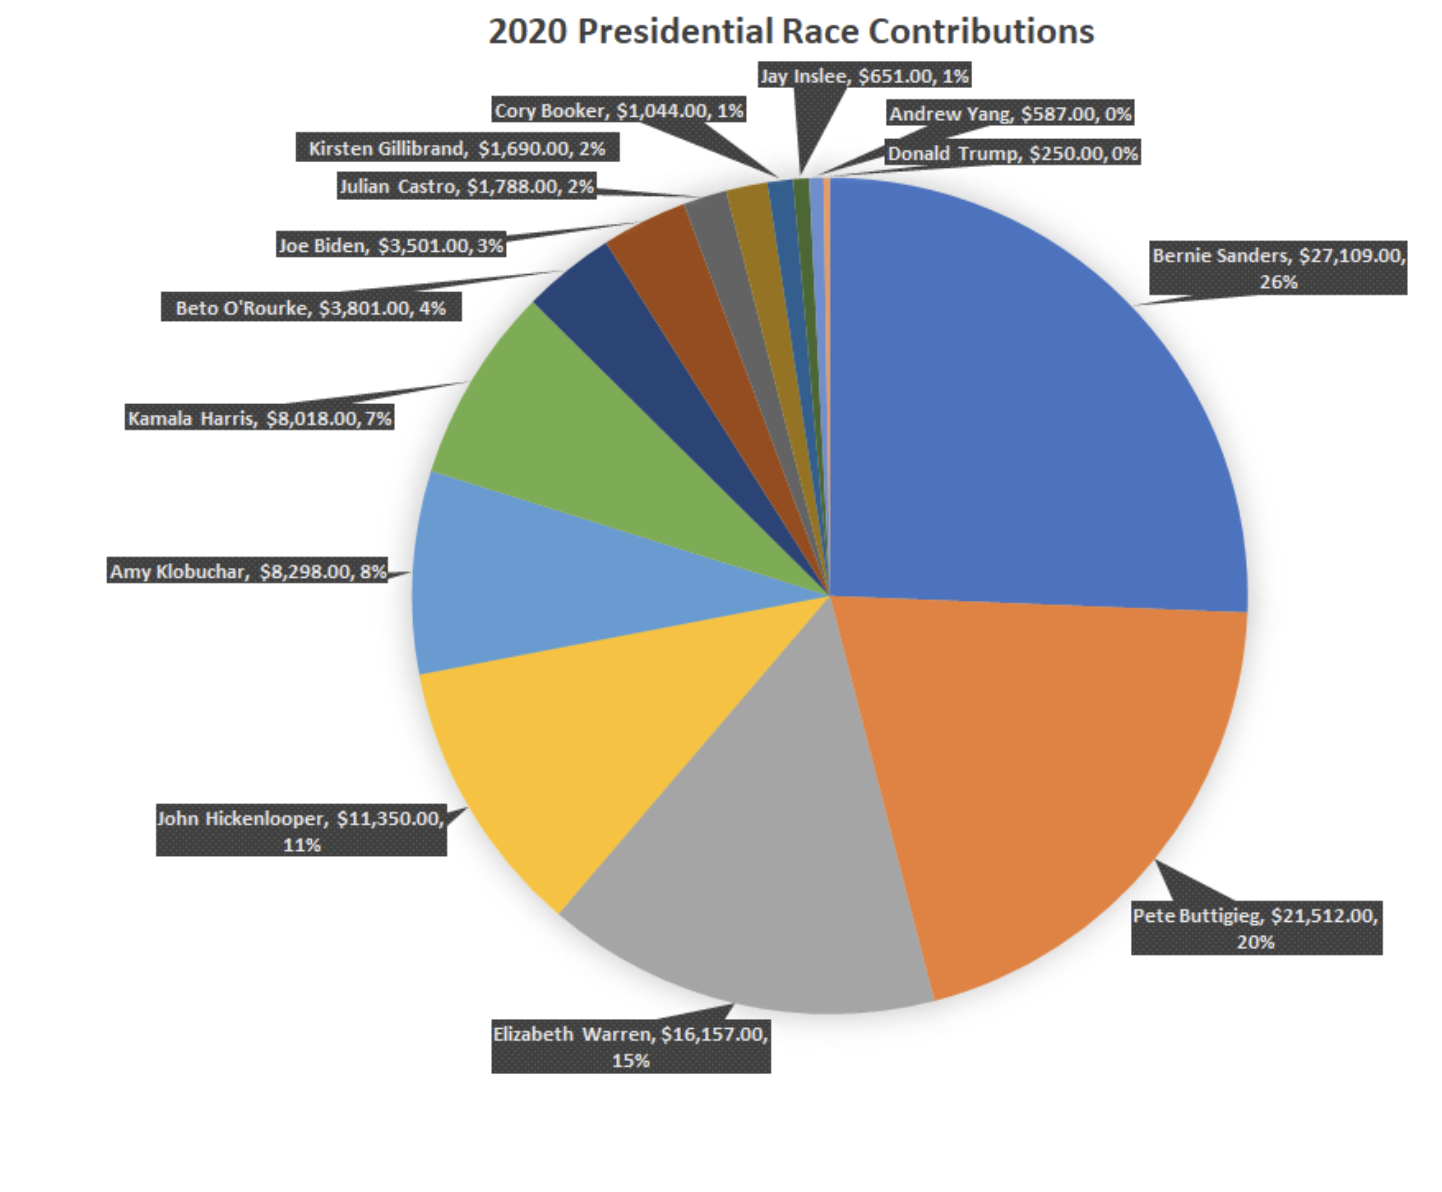 Contributions to the 2020 presidential race by UChicago affiliates.